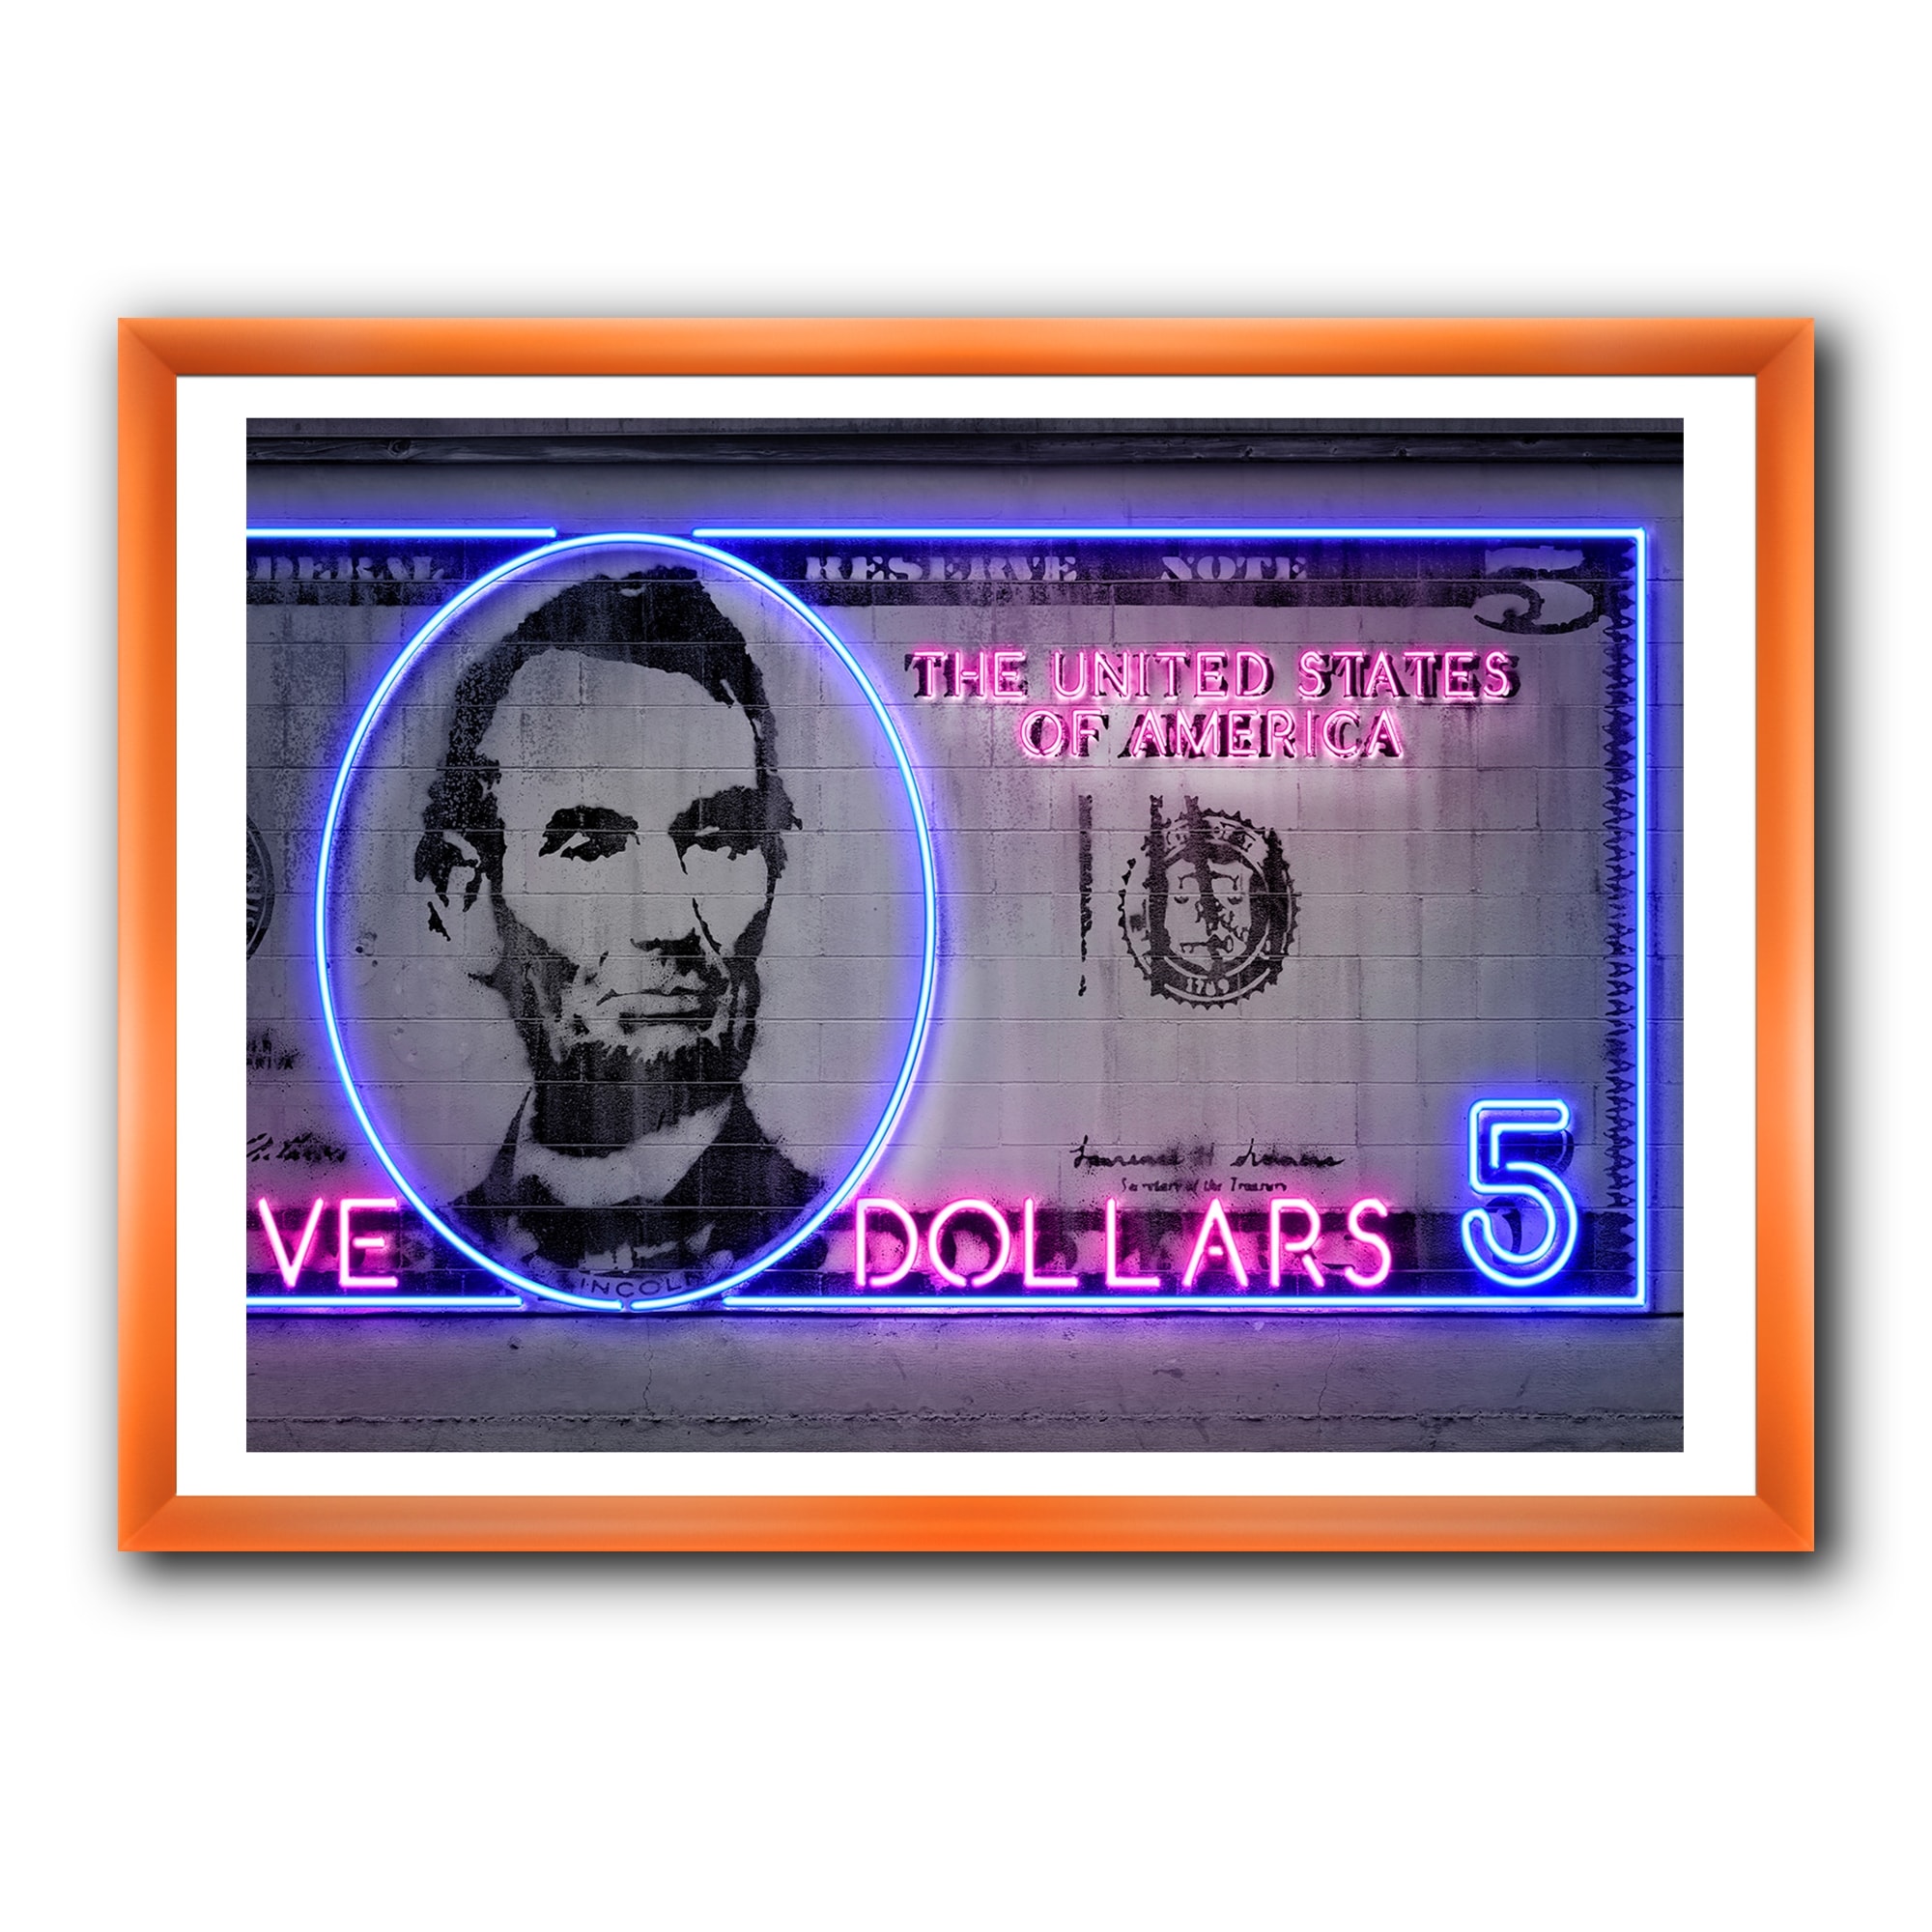 Neon Lincoln on Five Dollar Bill' - Picture Frame Print on Canvas East Urban Home Frame Color: Black Framed, Size: 12 H x 20 W x 1 D